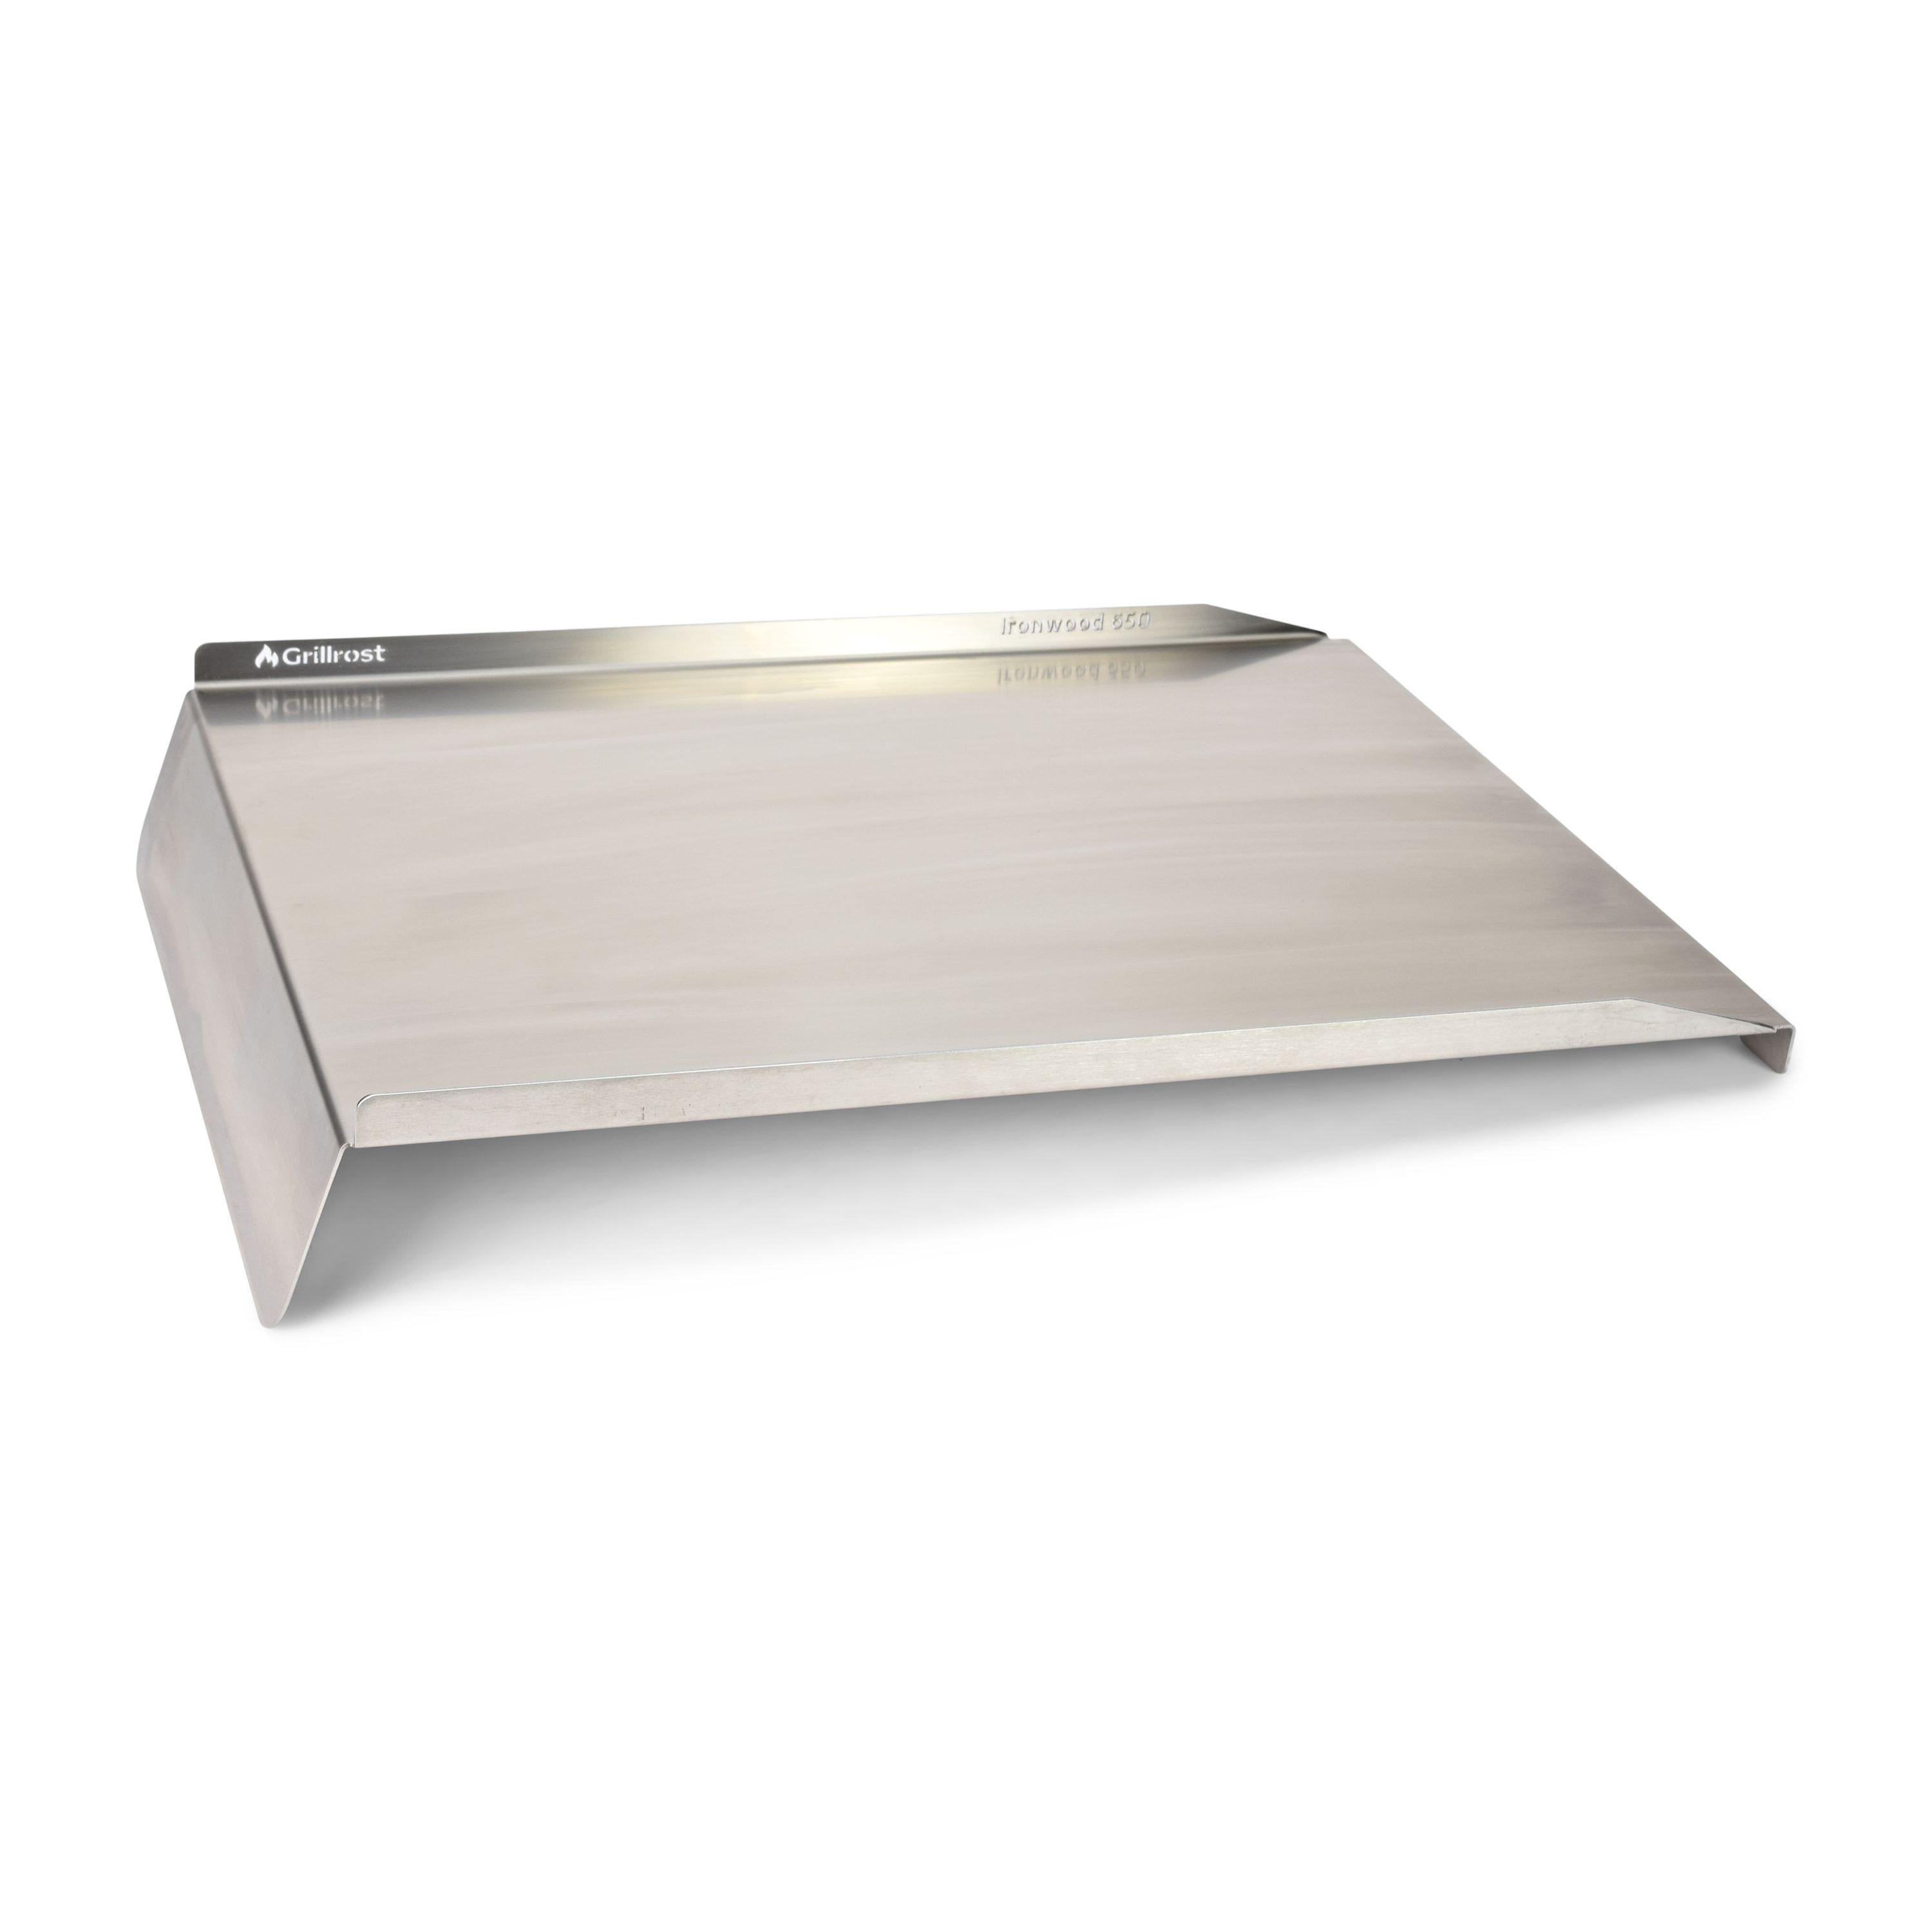 Stainless steel grease drain plate for carrier Ironwood 650